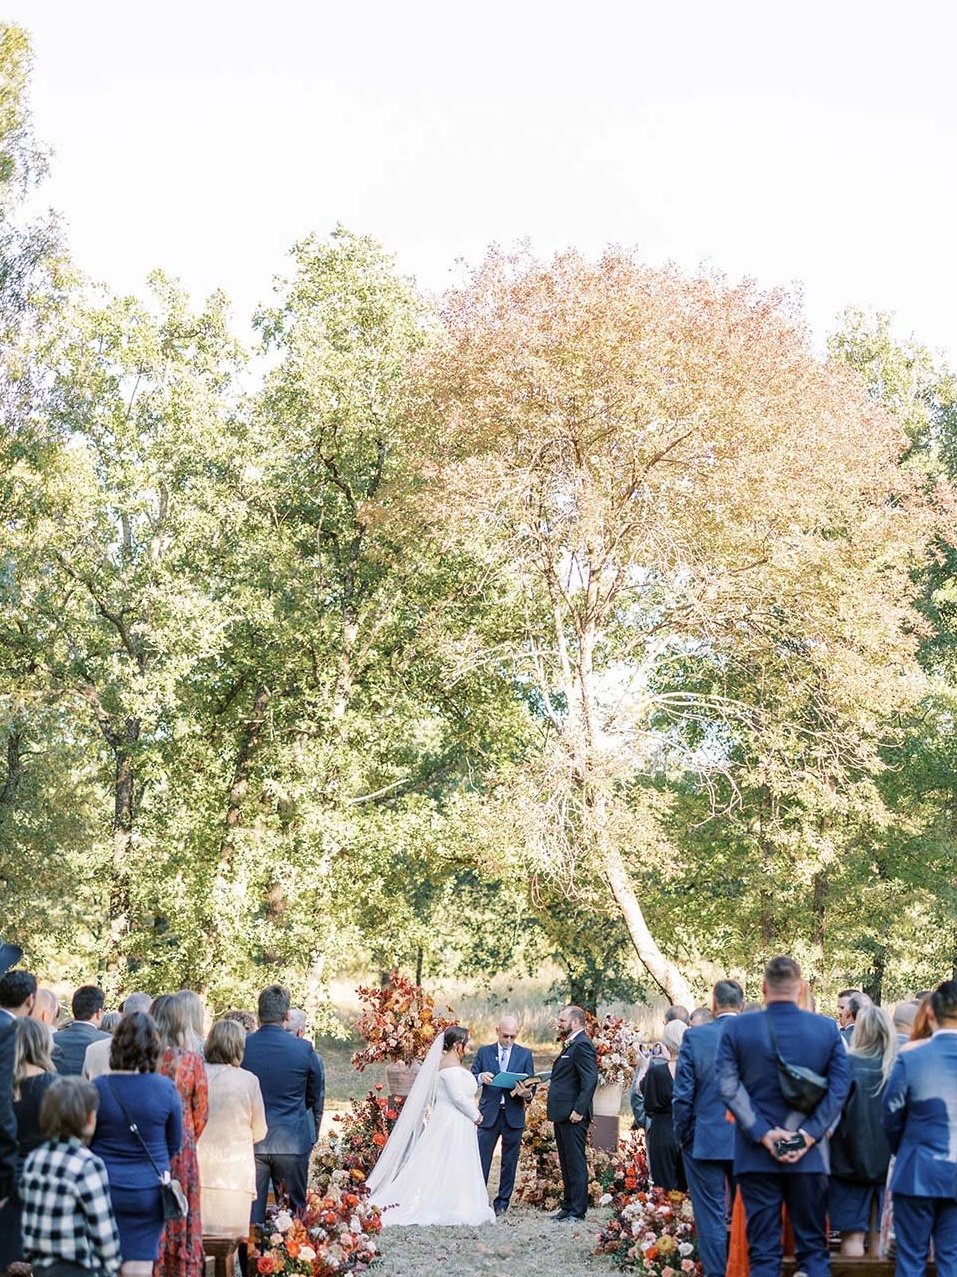 Texas wedding ceremony under tall trees and wood benches